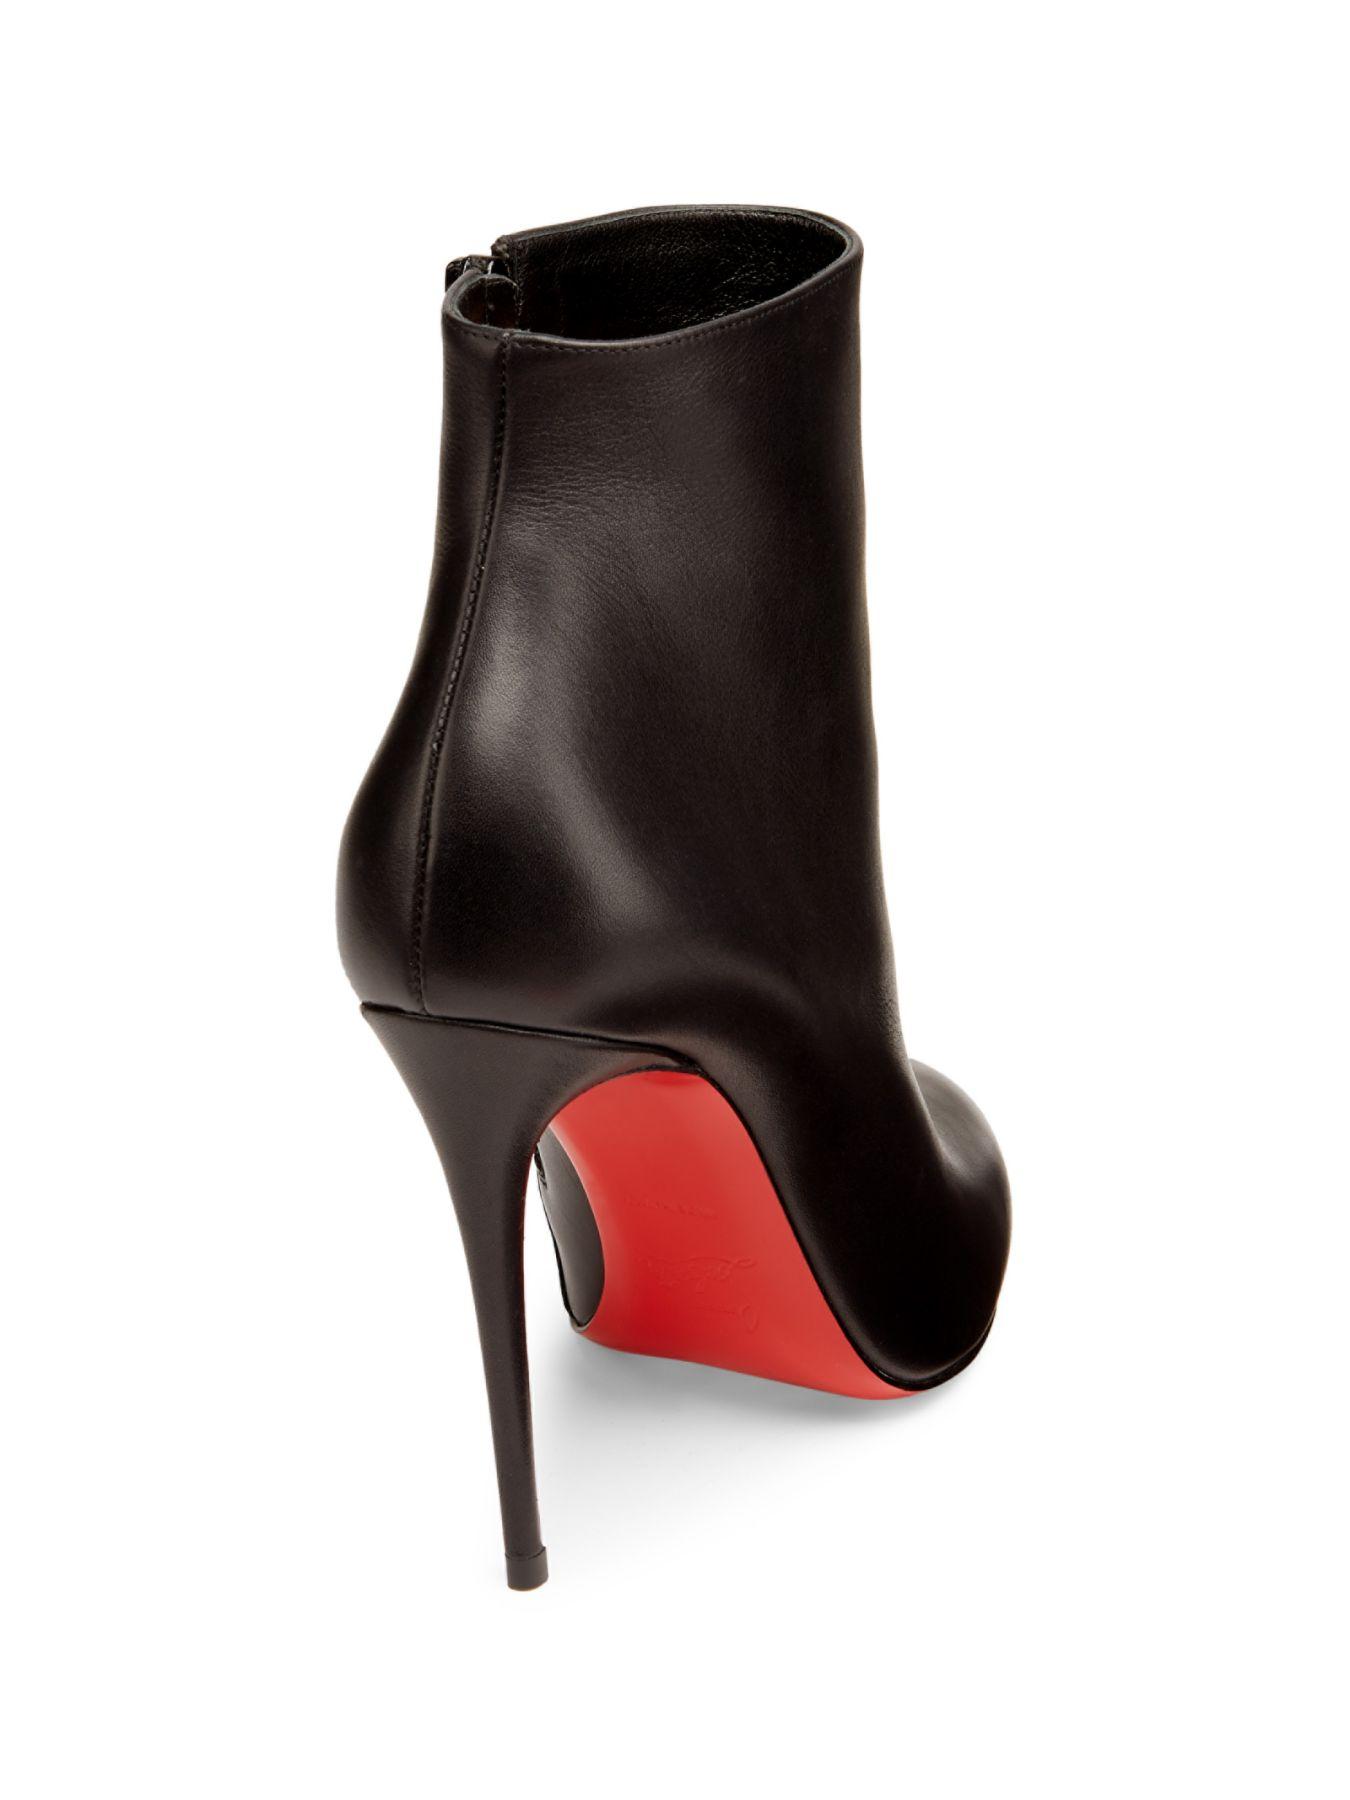 Christian Louboutin Eloise Leather Ankle Boots in Black | Lyst